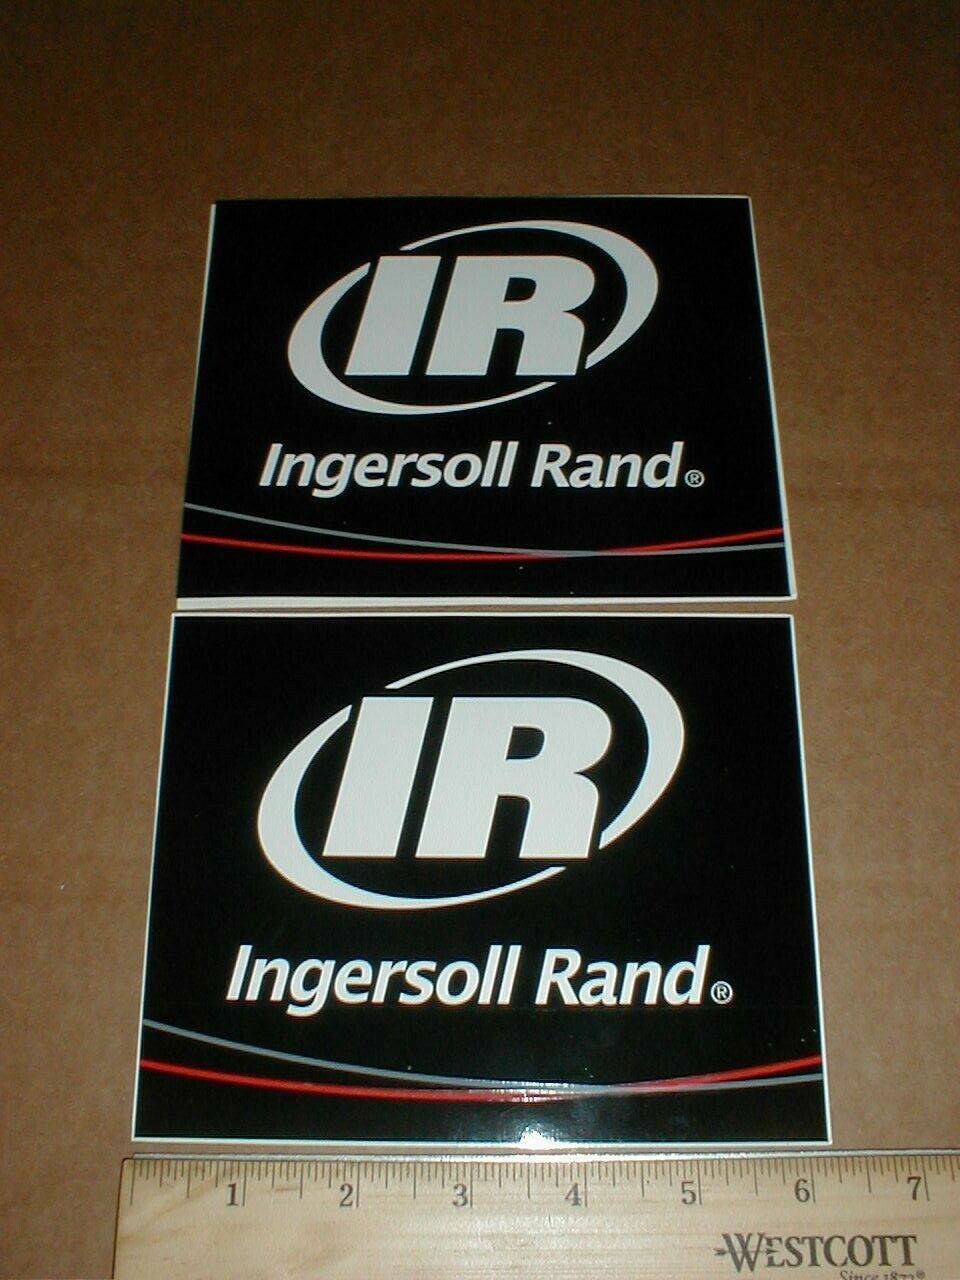 2 Ingersoll Rand 1990s-2000s work shop tools Drag Racing Decal Sticker Lot